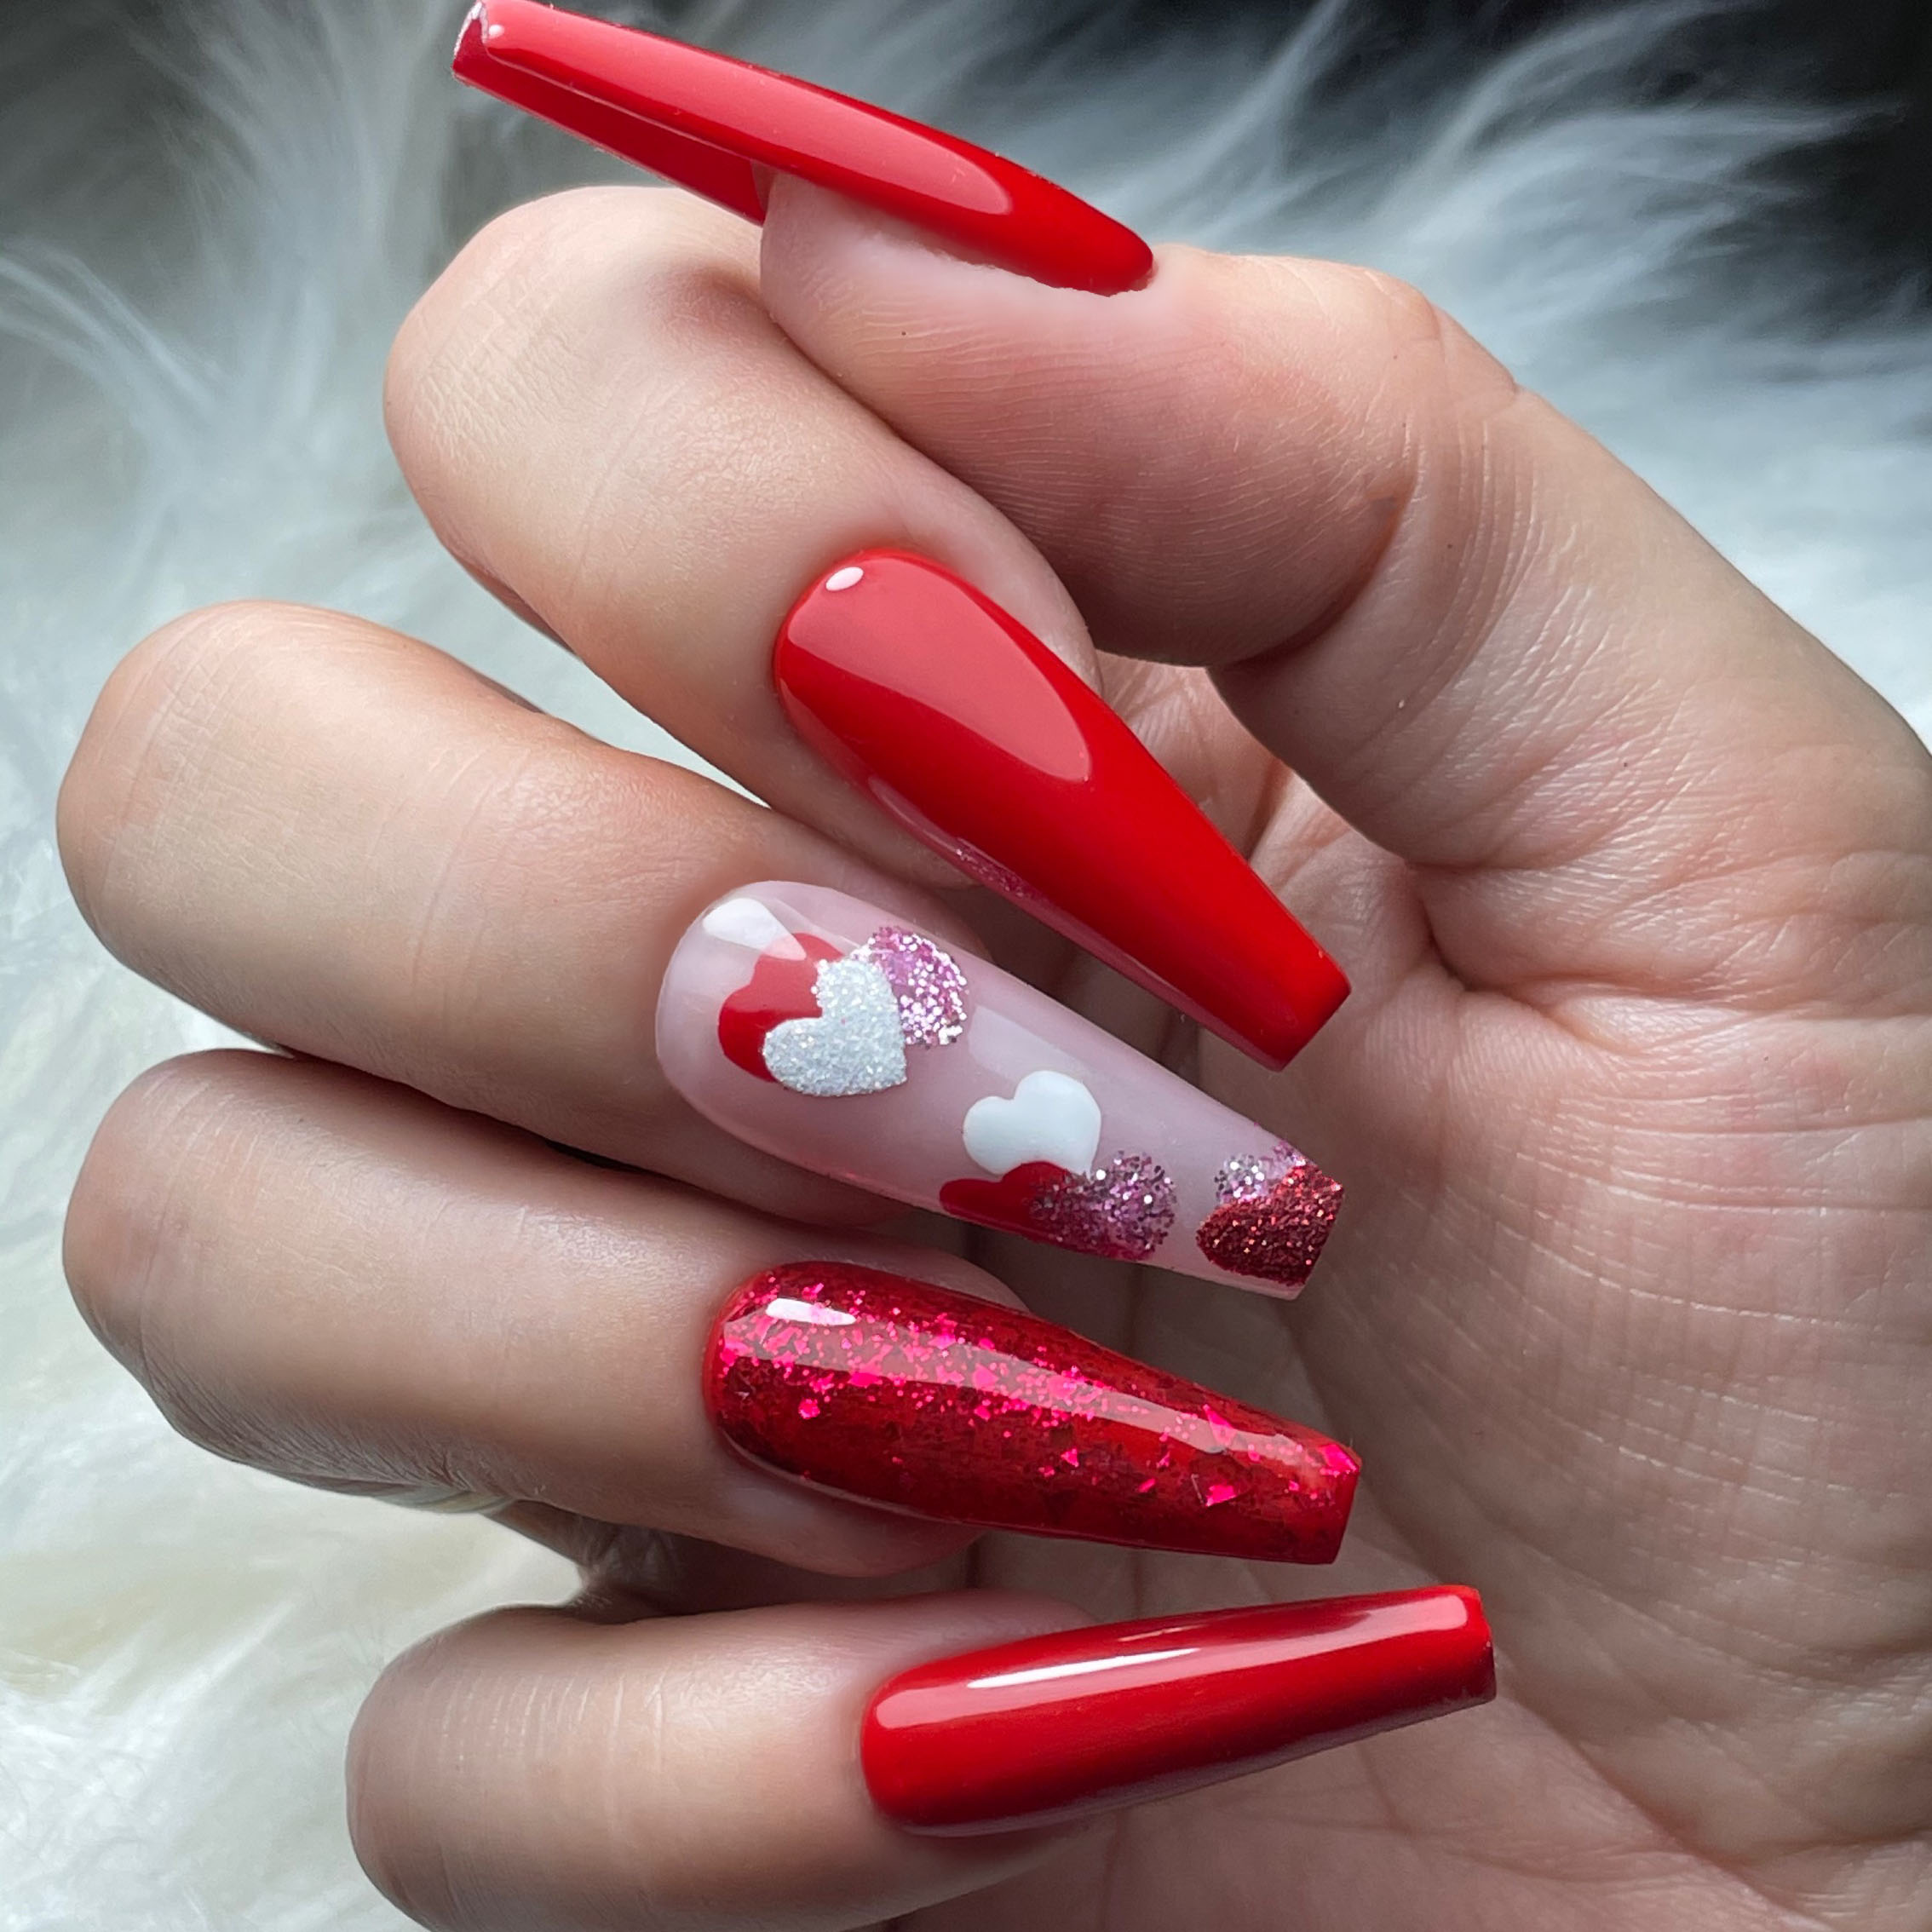 LEL_red nails